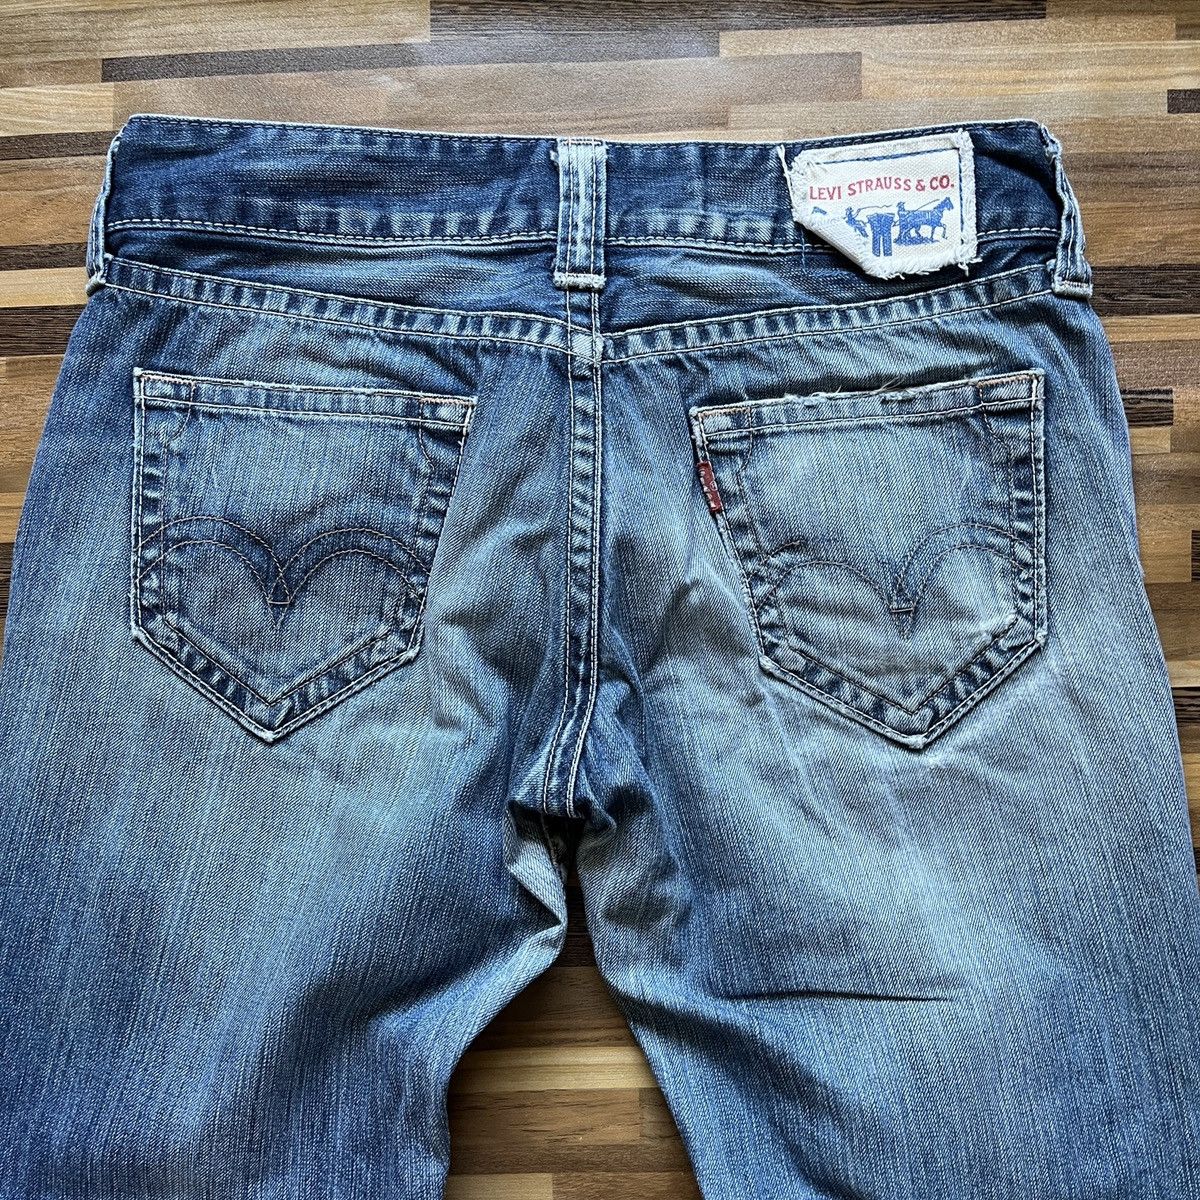 Vintage - Levis White Tag Made In Japan - 17